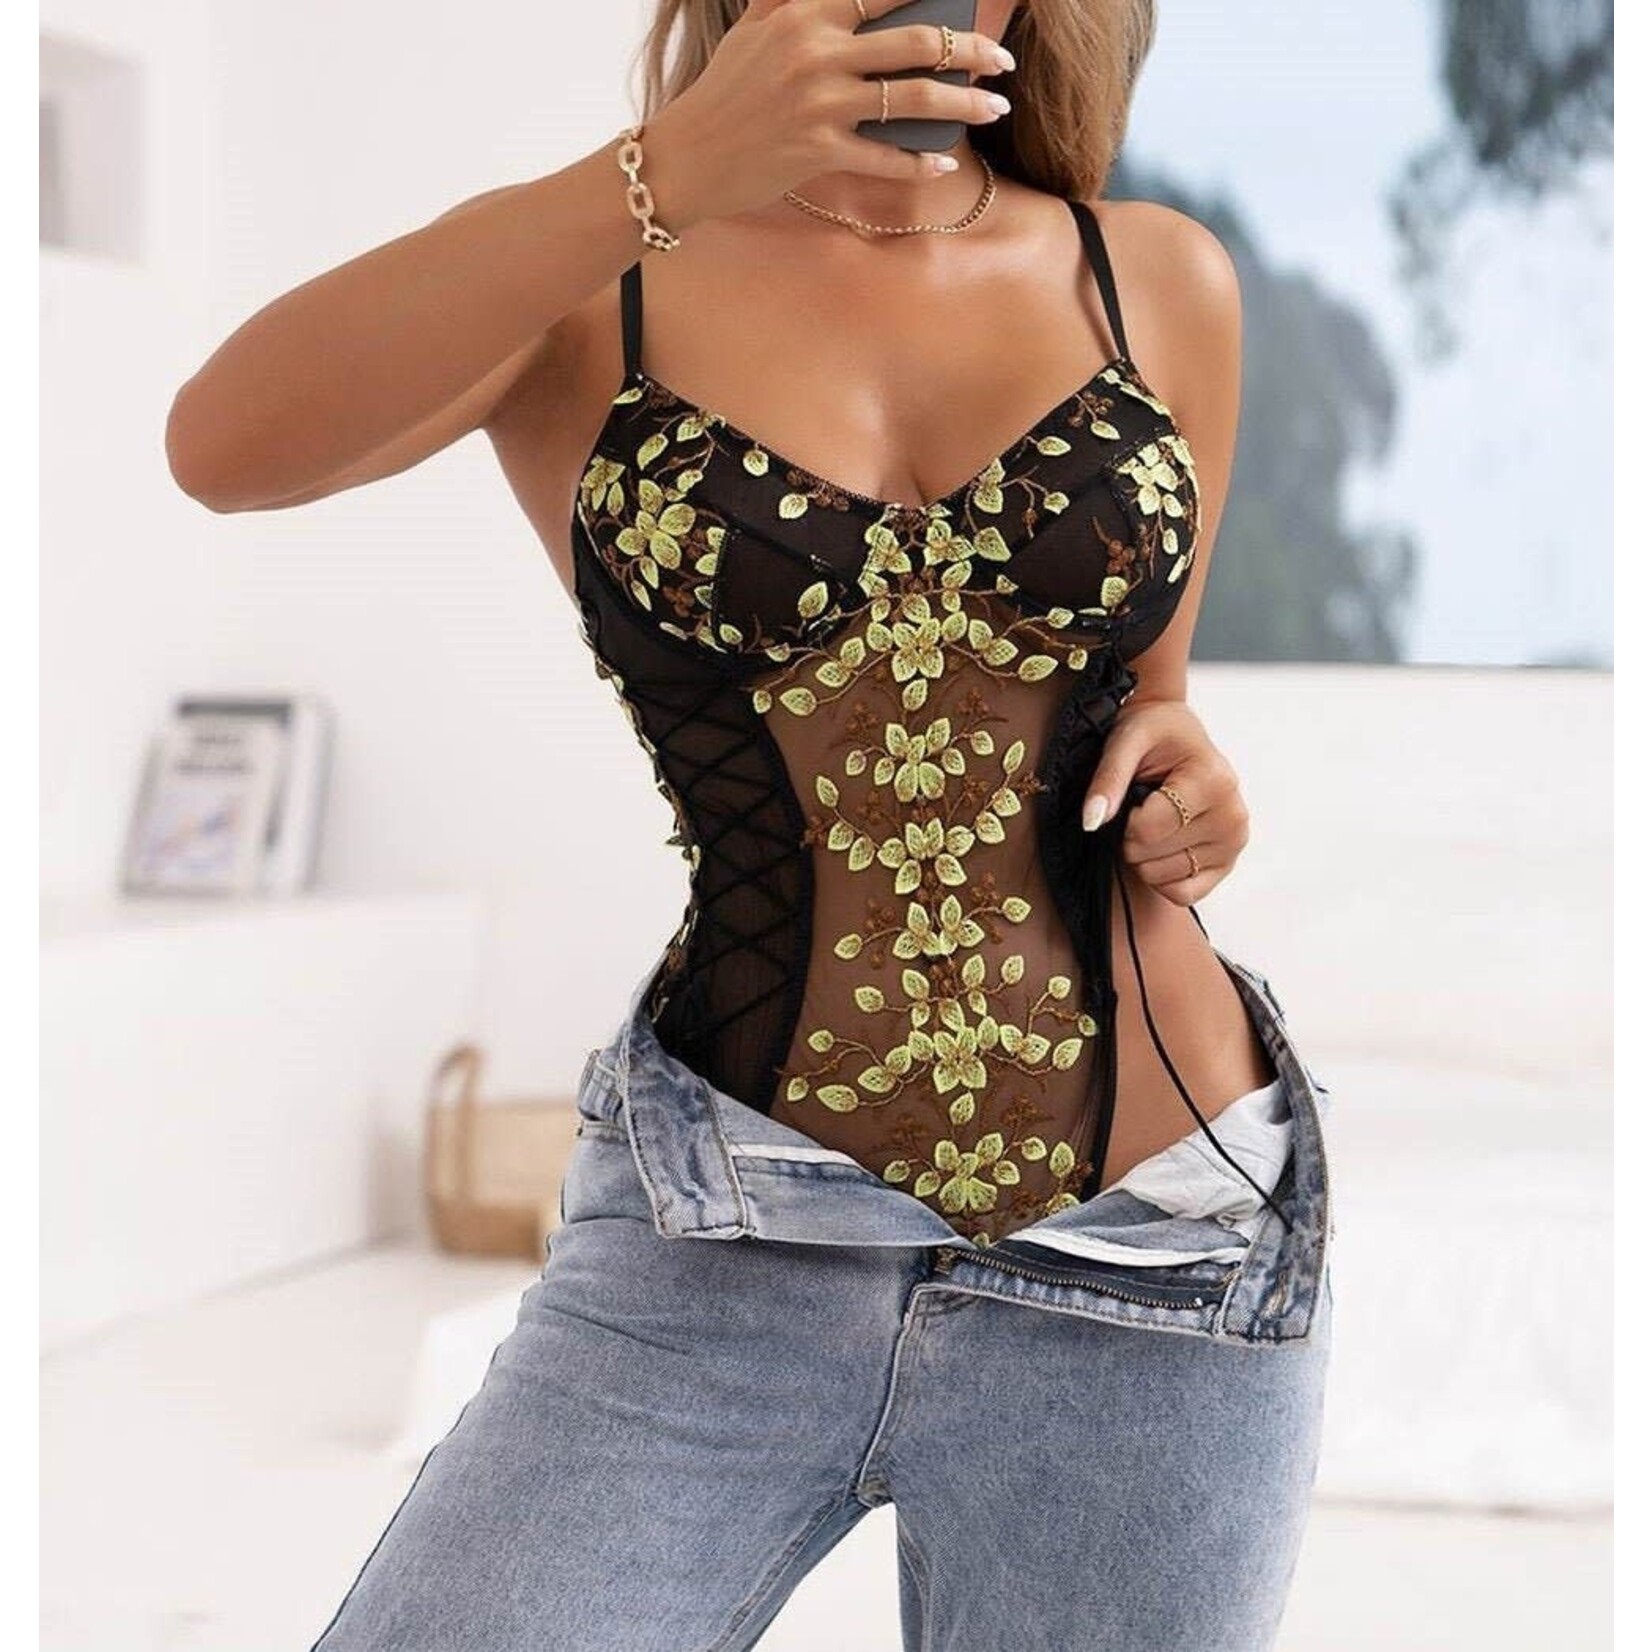 OH YEAH! -  FASHION EMBROIDERY BLACK MESH PLUS SIZE BODYSUIT WITH UNDERWIRE S-SM